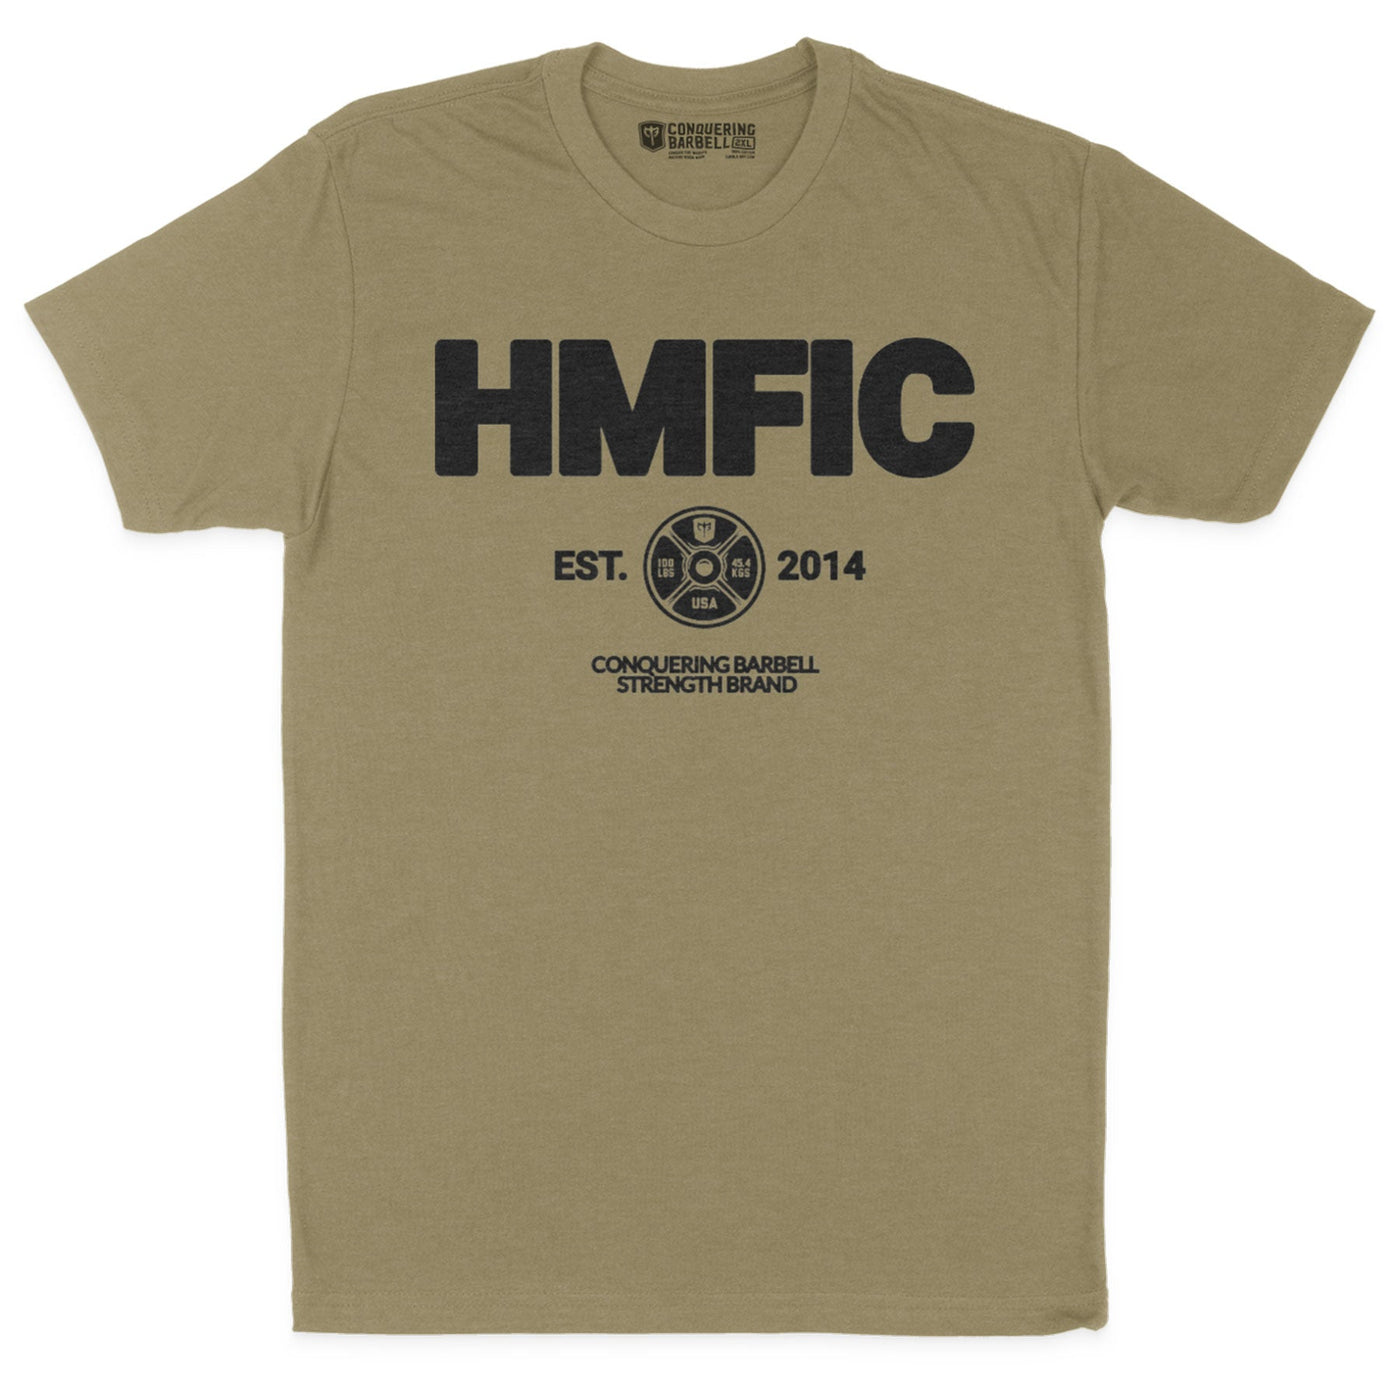 HMFIC - on Light Olive tee - Conquering Barbell